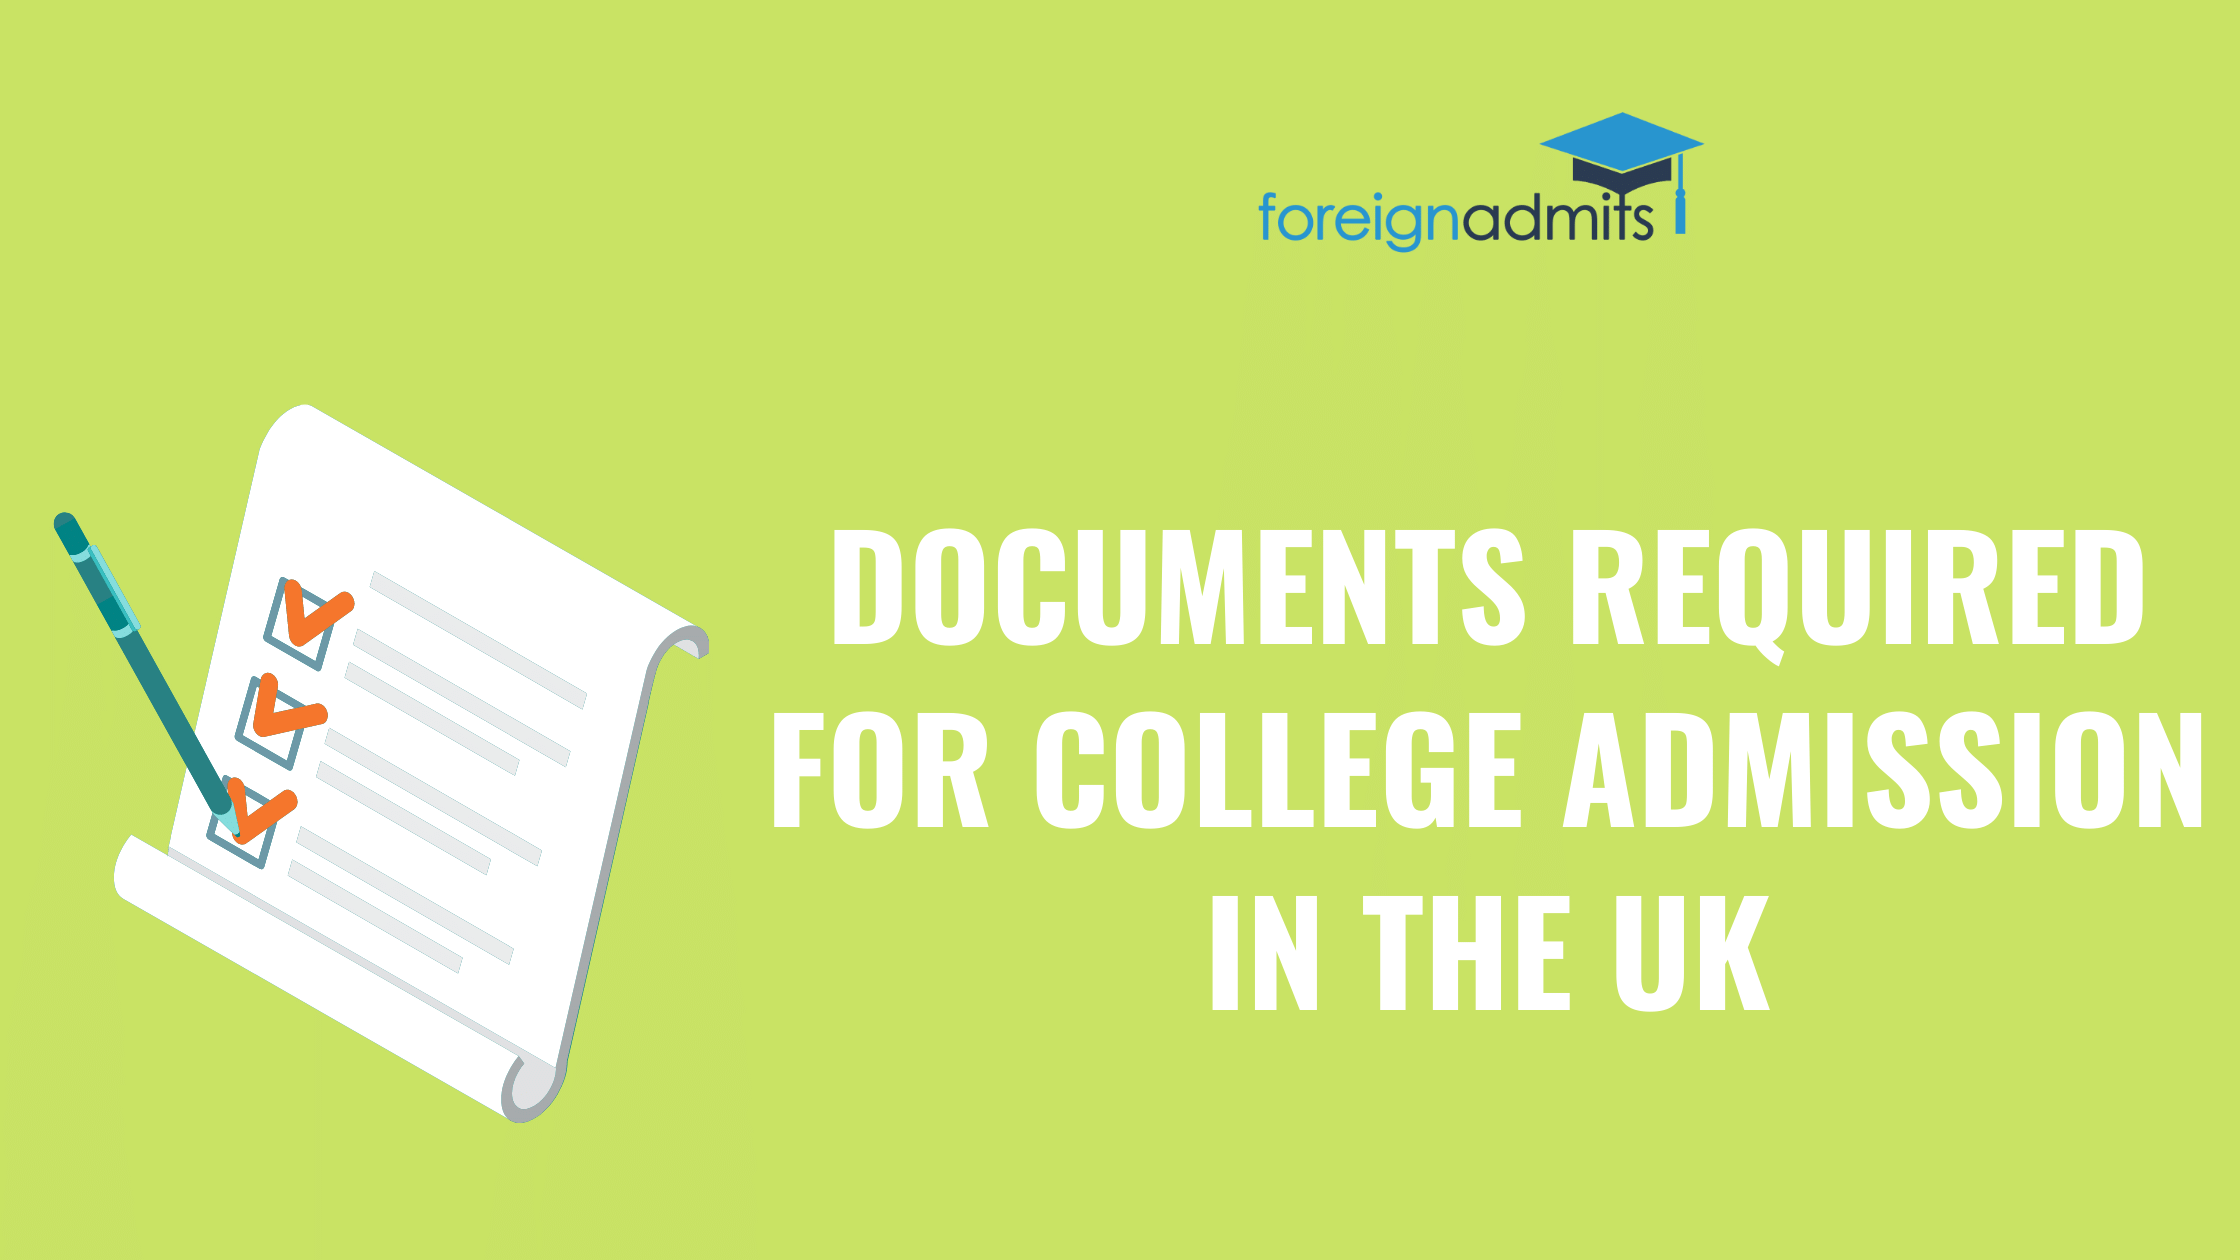 Documents Required for College Admission in the UK